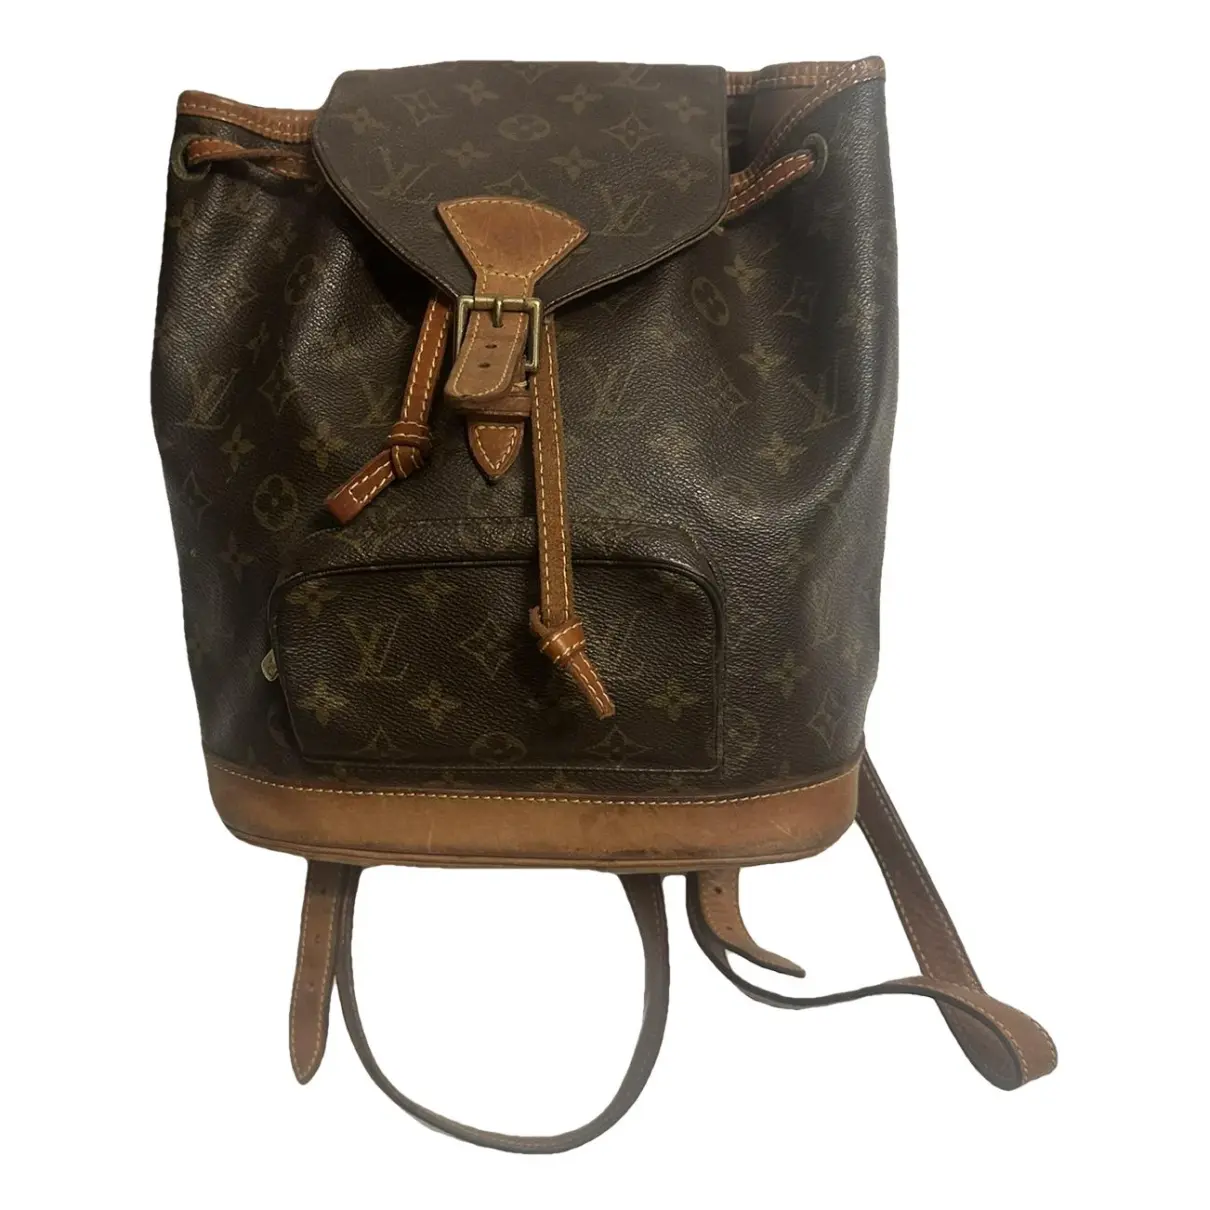 Montsouris Vintage pony-style calfskin backpack